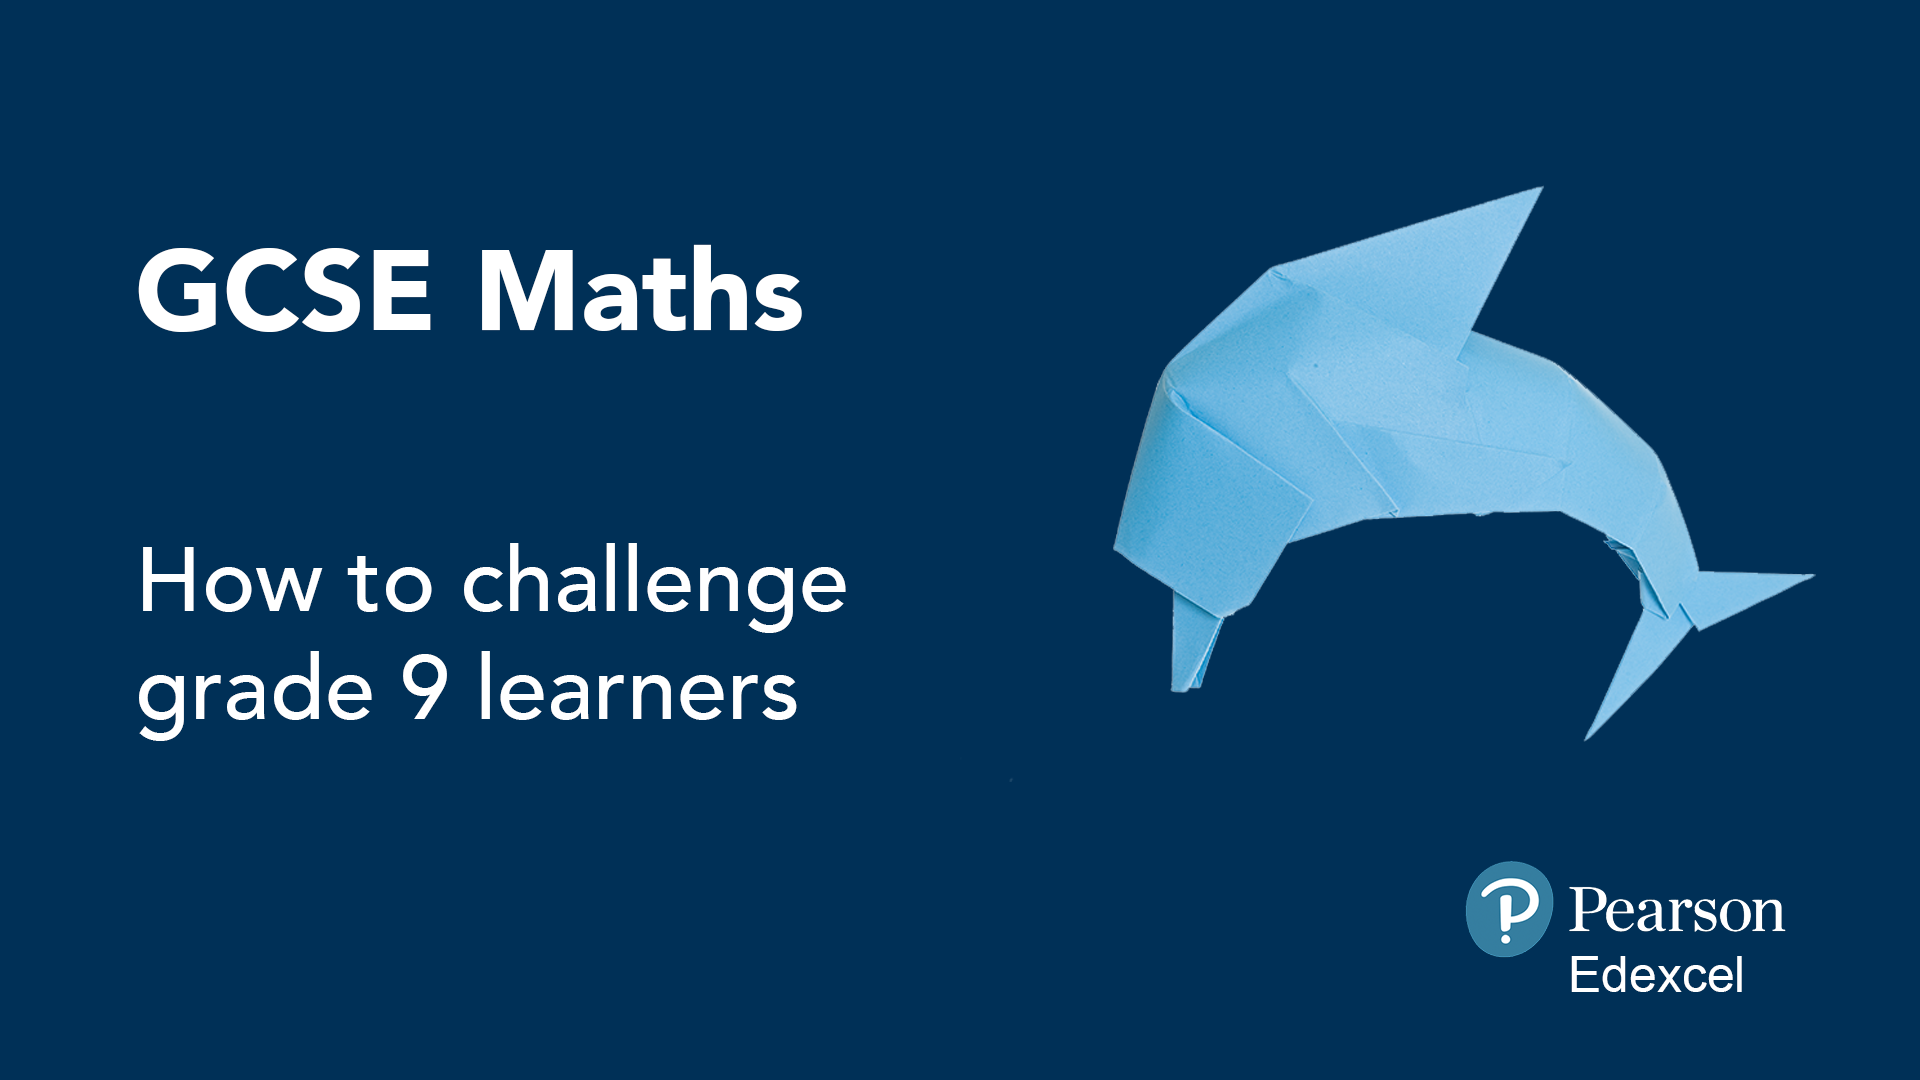 GCSE Maths: How to challenge grade 9 learners